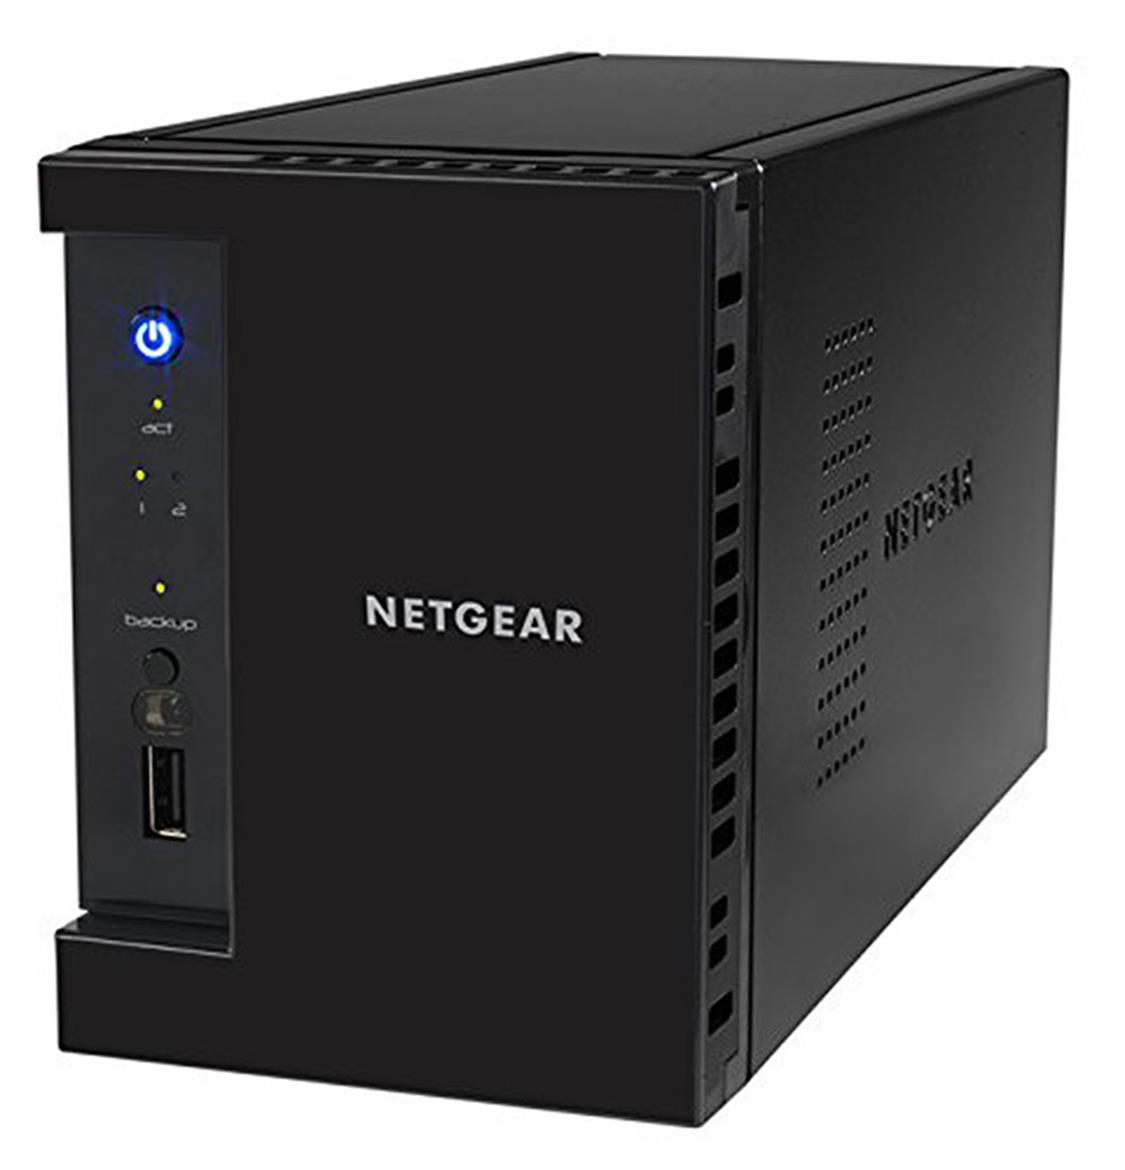 Netgear ReadyNAS RN212 Network Attached Storage Review